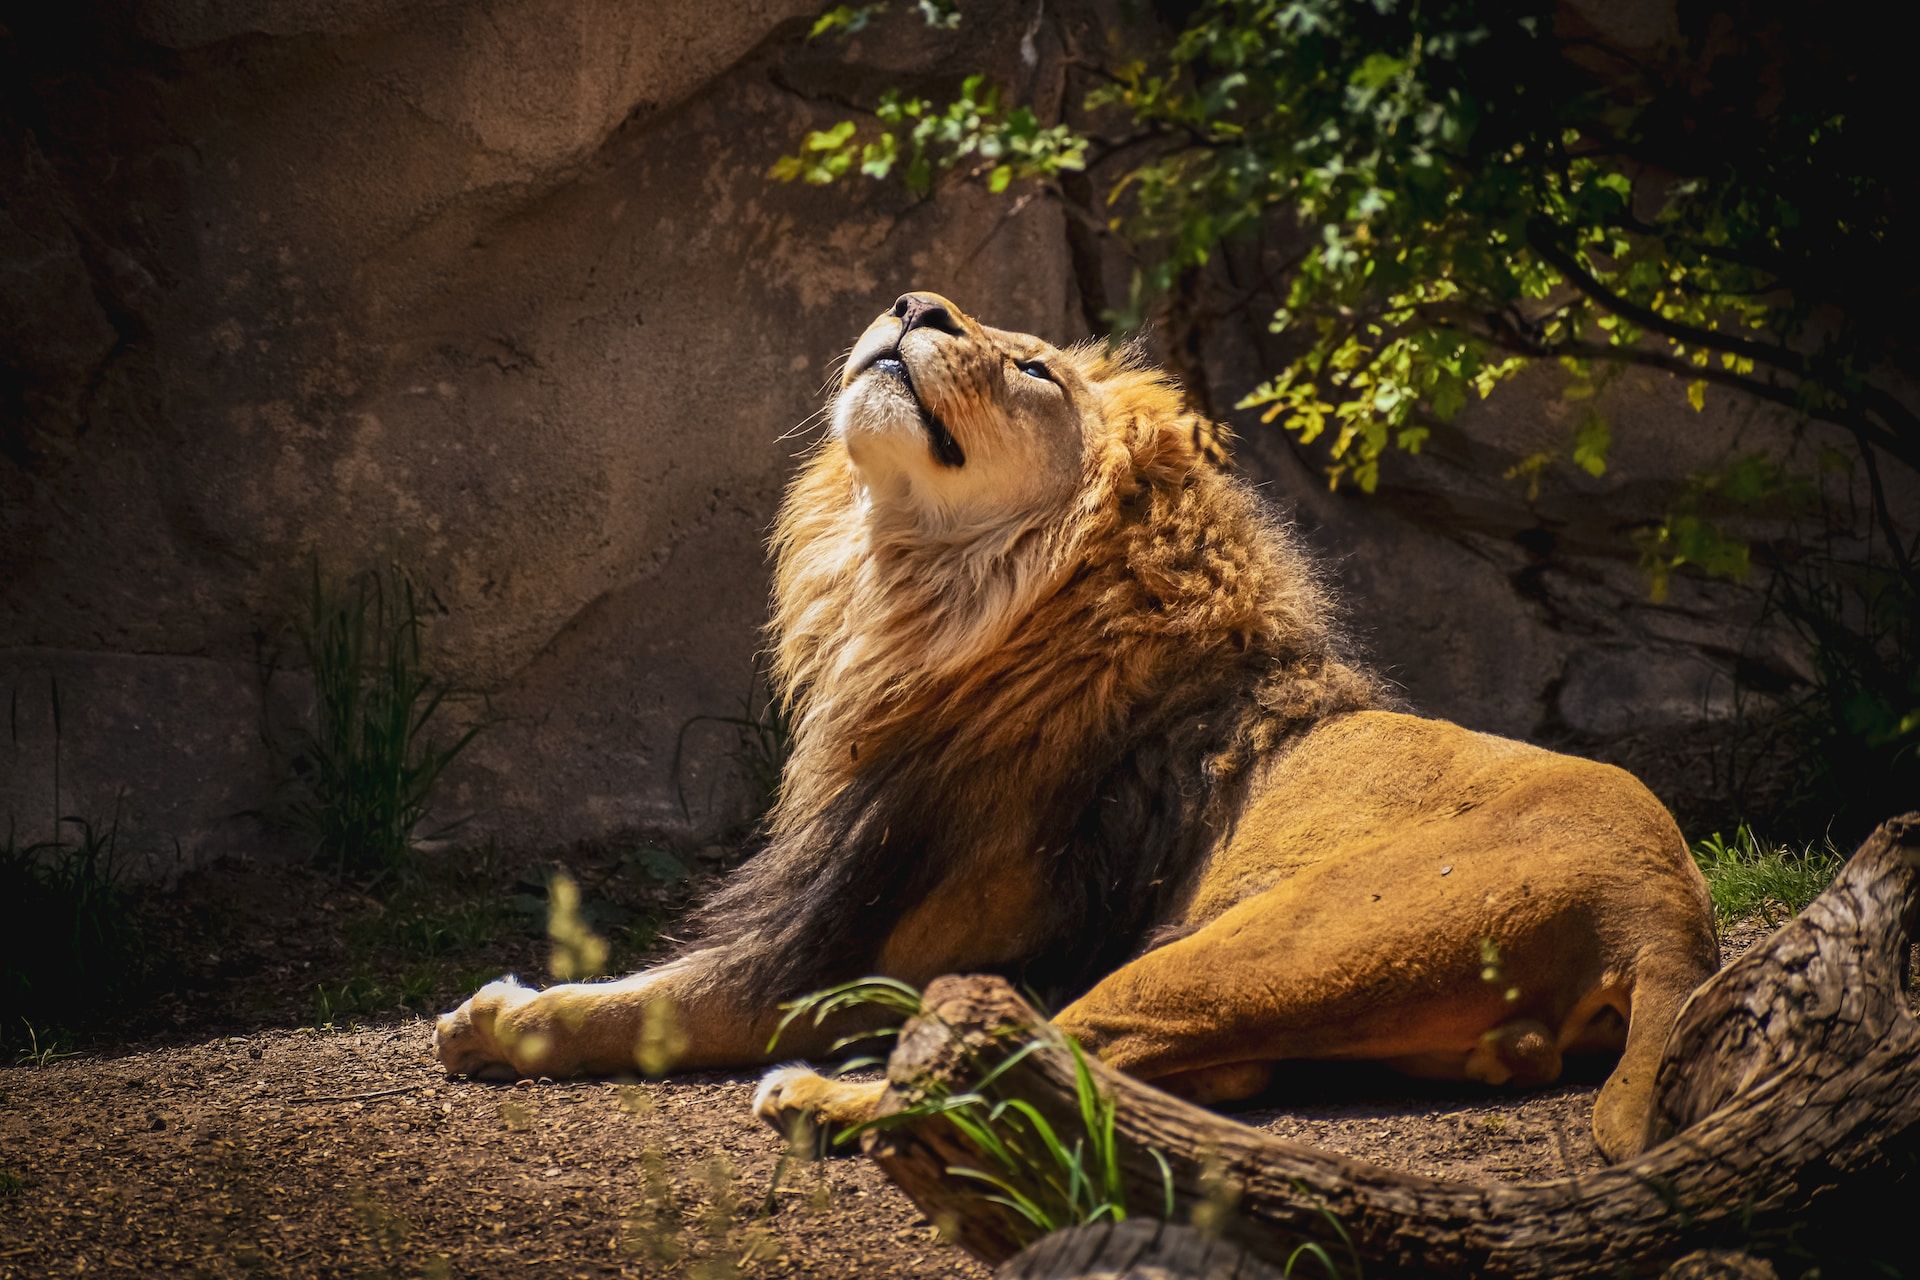 One of the Denver Zoo's lions soaking in some sun in Denver, Colorado